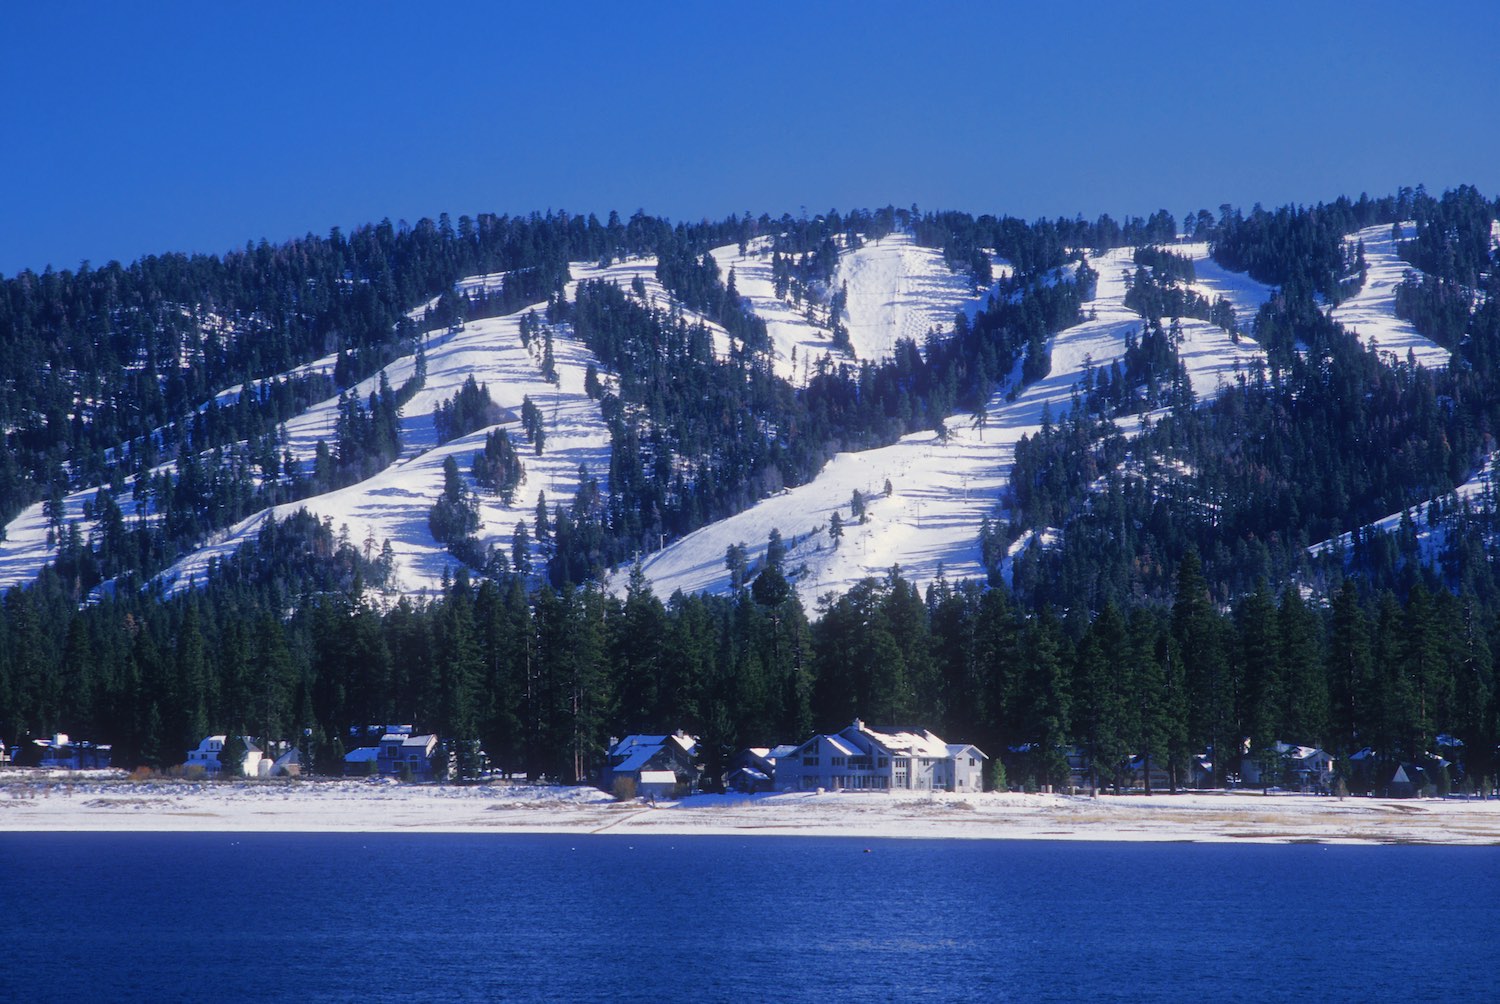 Where to stay in Big Bear Lake